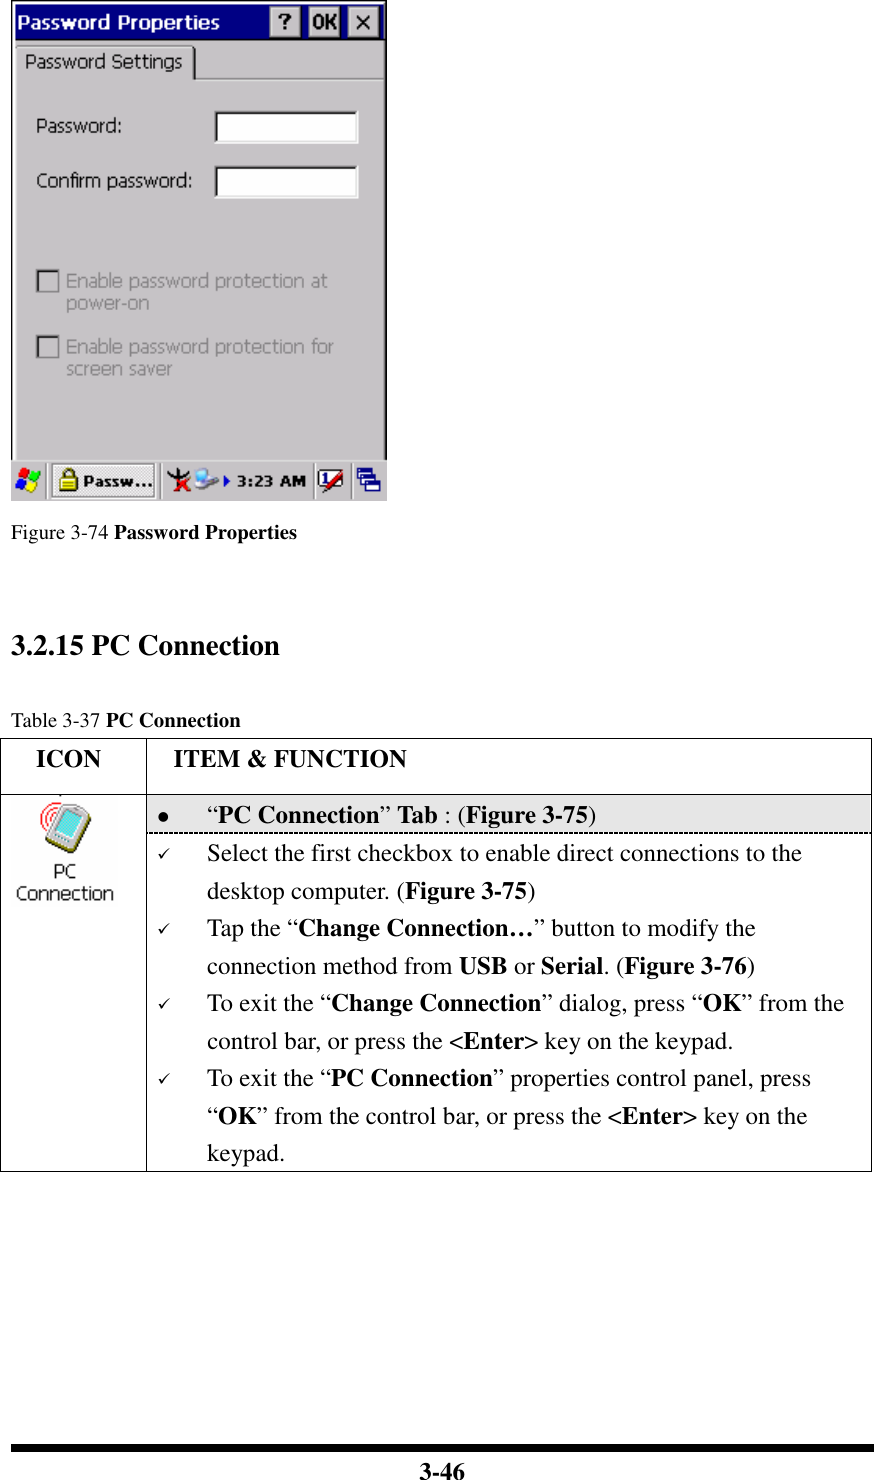  3-46    Figure 3-74 Password Properties   3.2.15 PC Connection    Table 3-37 PC Connection     ICON  ITEM &amp; FUNCTION  “PC Connection” Tab : (Figure 3-75)   Select the first checkbox to enable direct connections to the desktop computer. (Figure 3-75)  Tap the “Change Connection…” button to modify the connection method from USB or Serial. (Figure 3-76)  To exit the “Change Connection” dialog, press “OK” from the control bar, or press the &lt;Enter&gt; key on the keypad.  To exit the “PC Connection” properties control panel, press “OK” from the control bar, or press the &lt;Enter&gt; key on the keypad.  